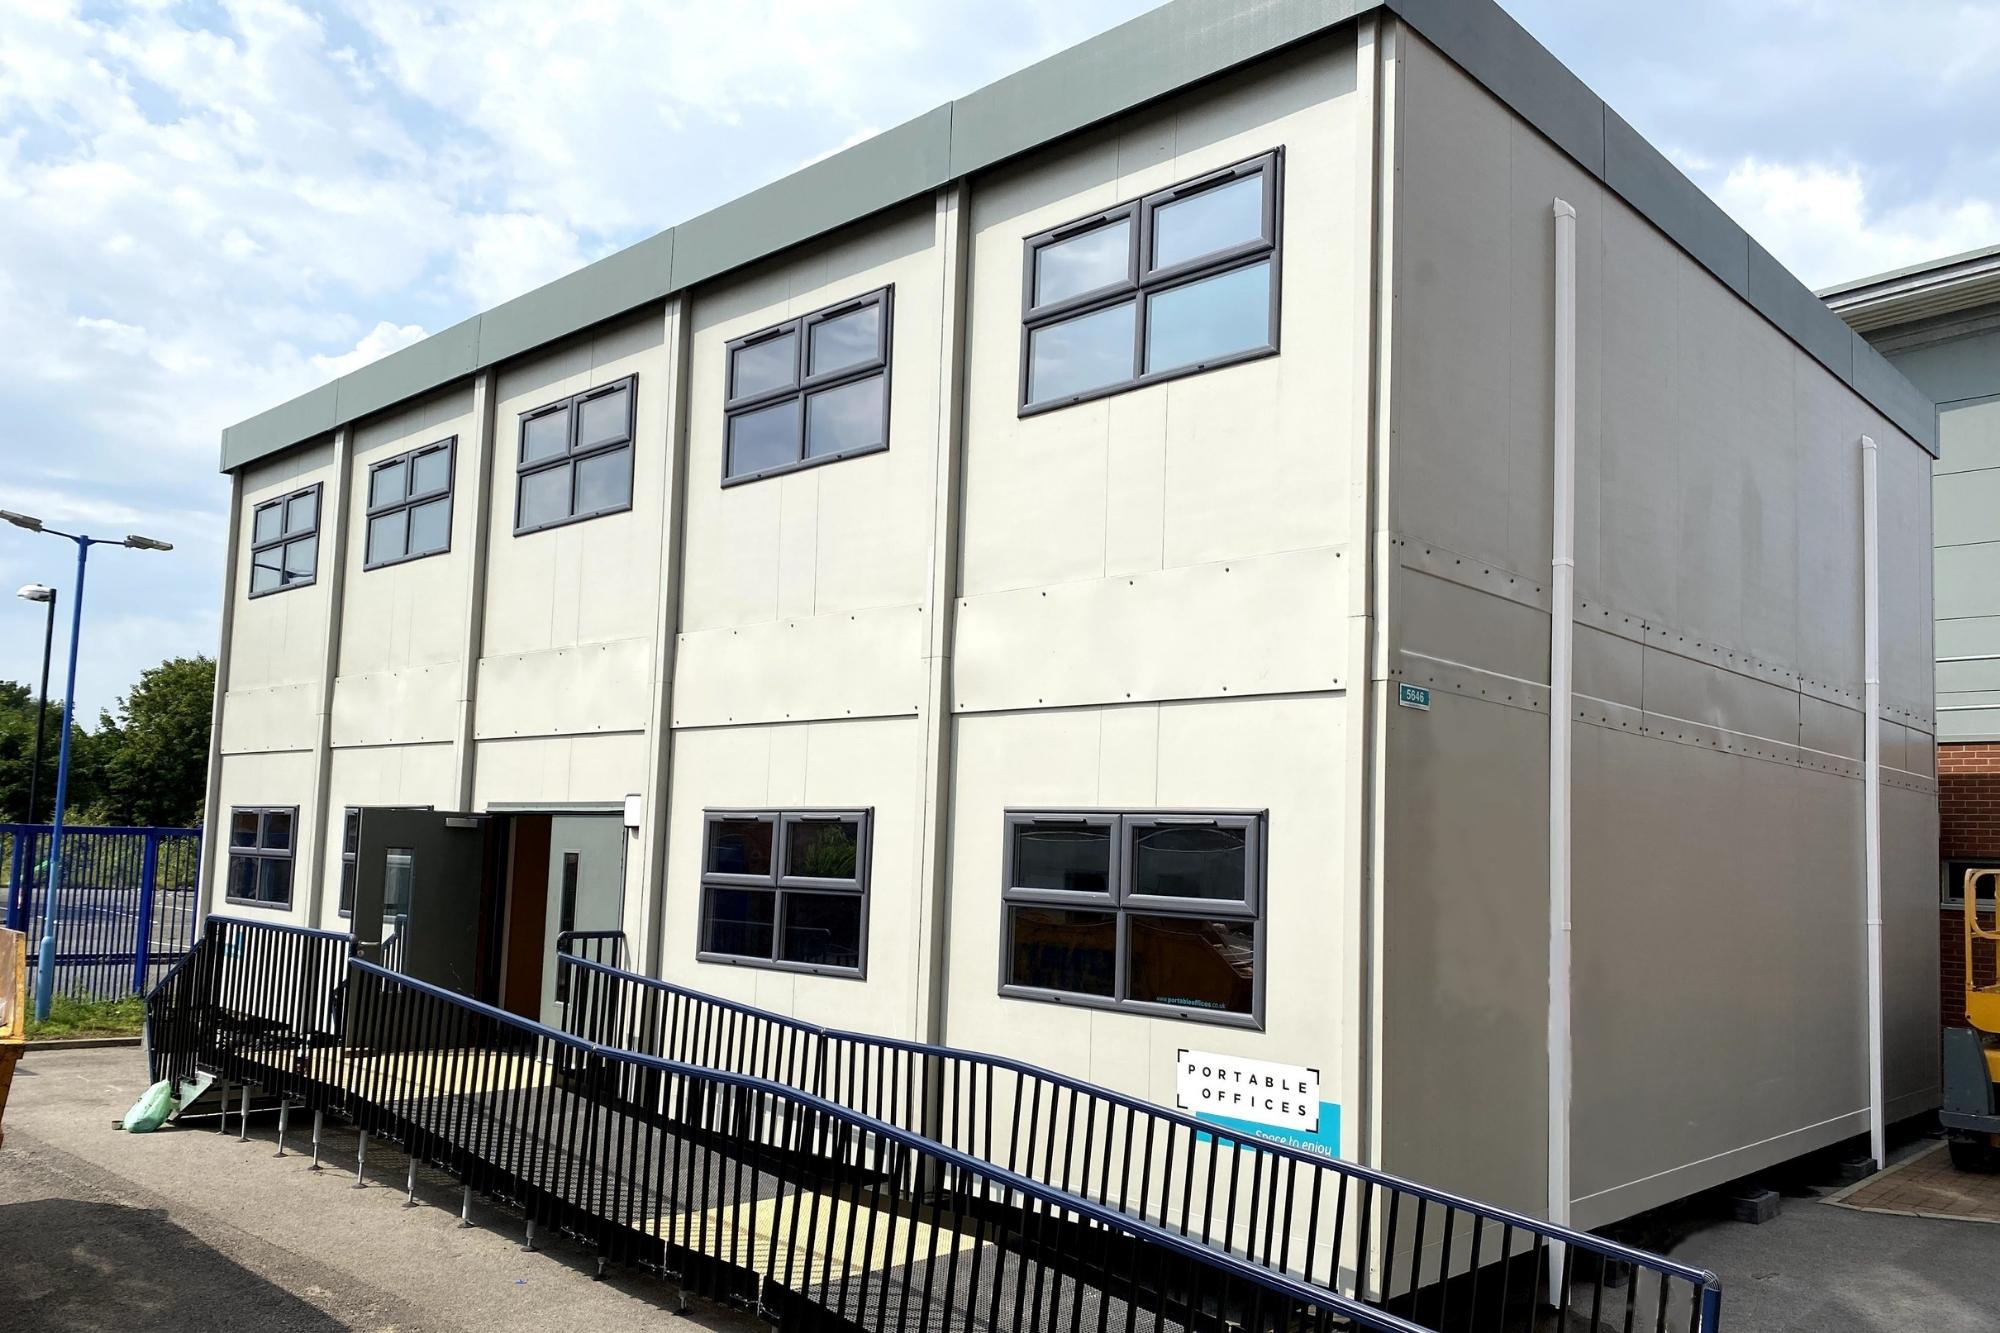 Portable Offices | Portable and Modular Buildings for Hire & Sale